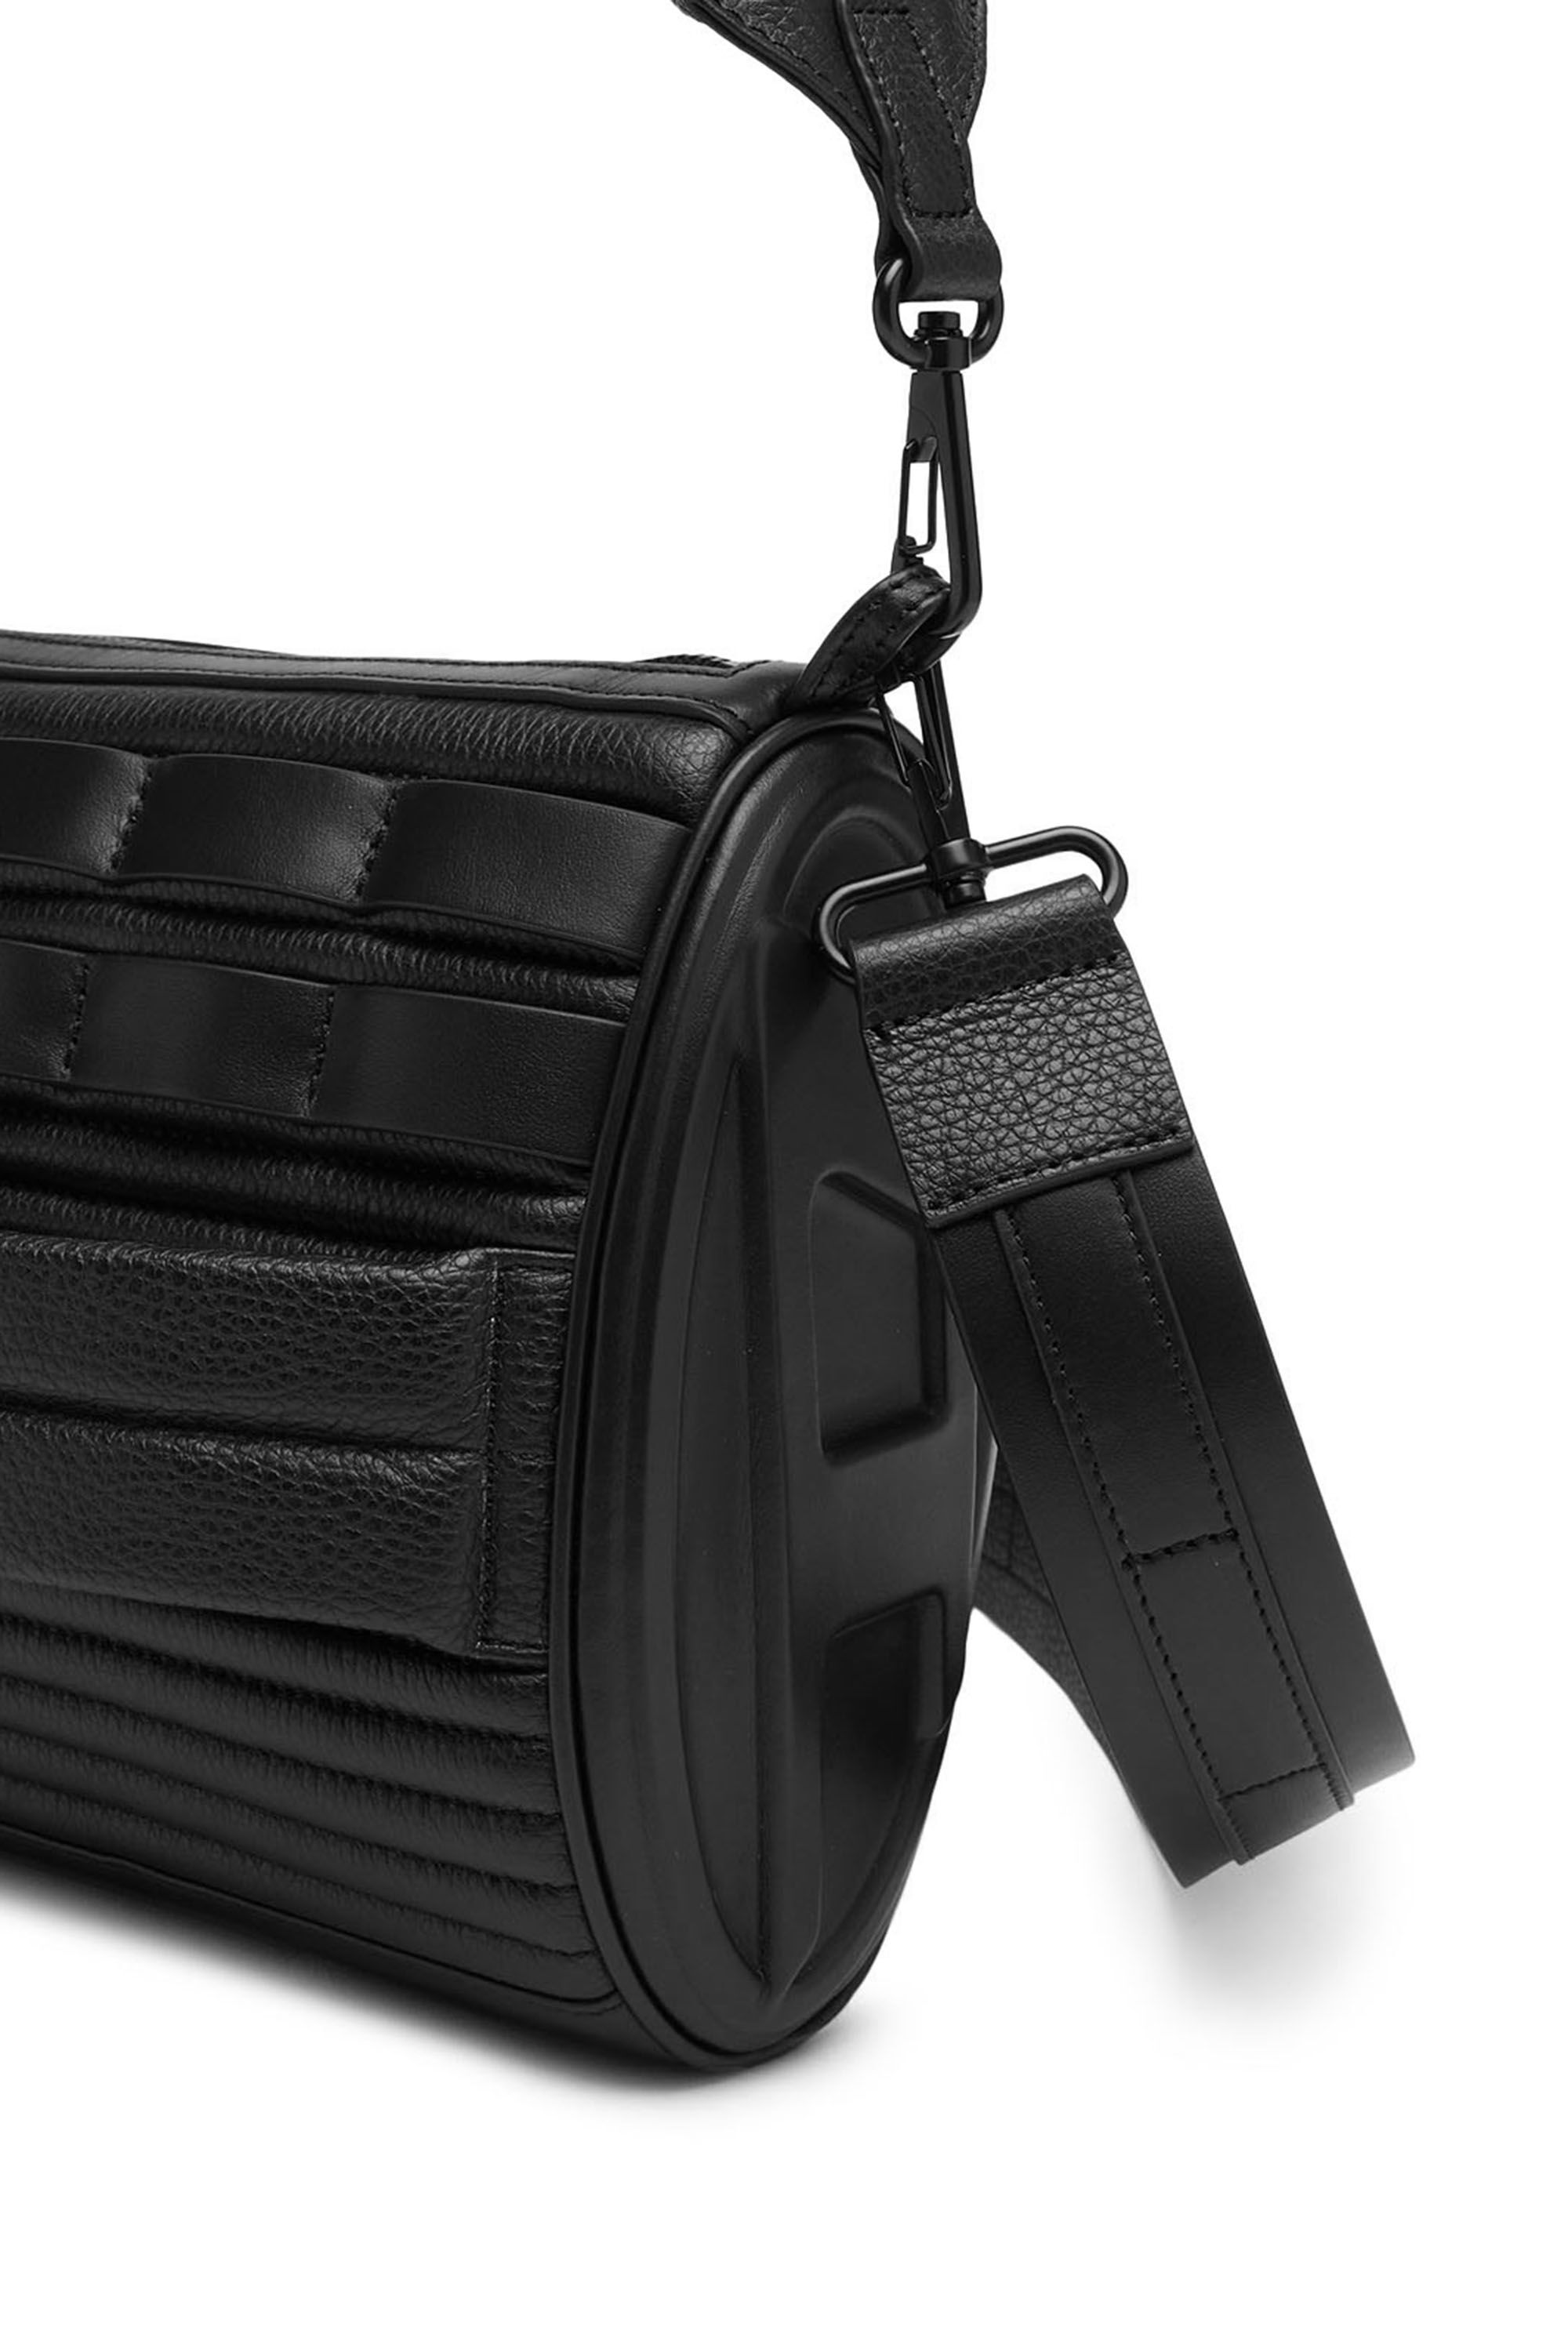 ODD CROSSBODY S X : Convertible utility bag in leather | Diesel